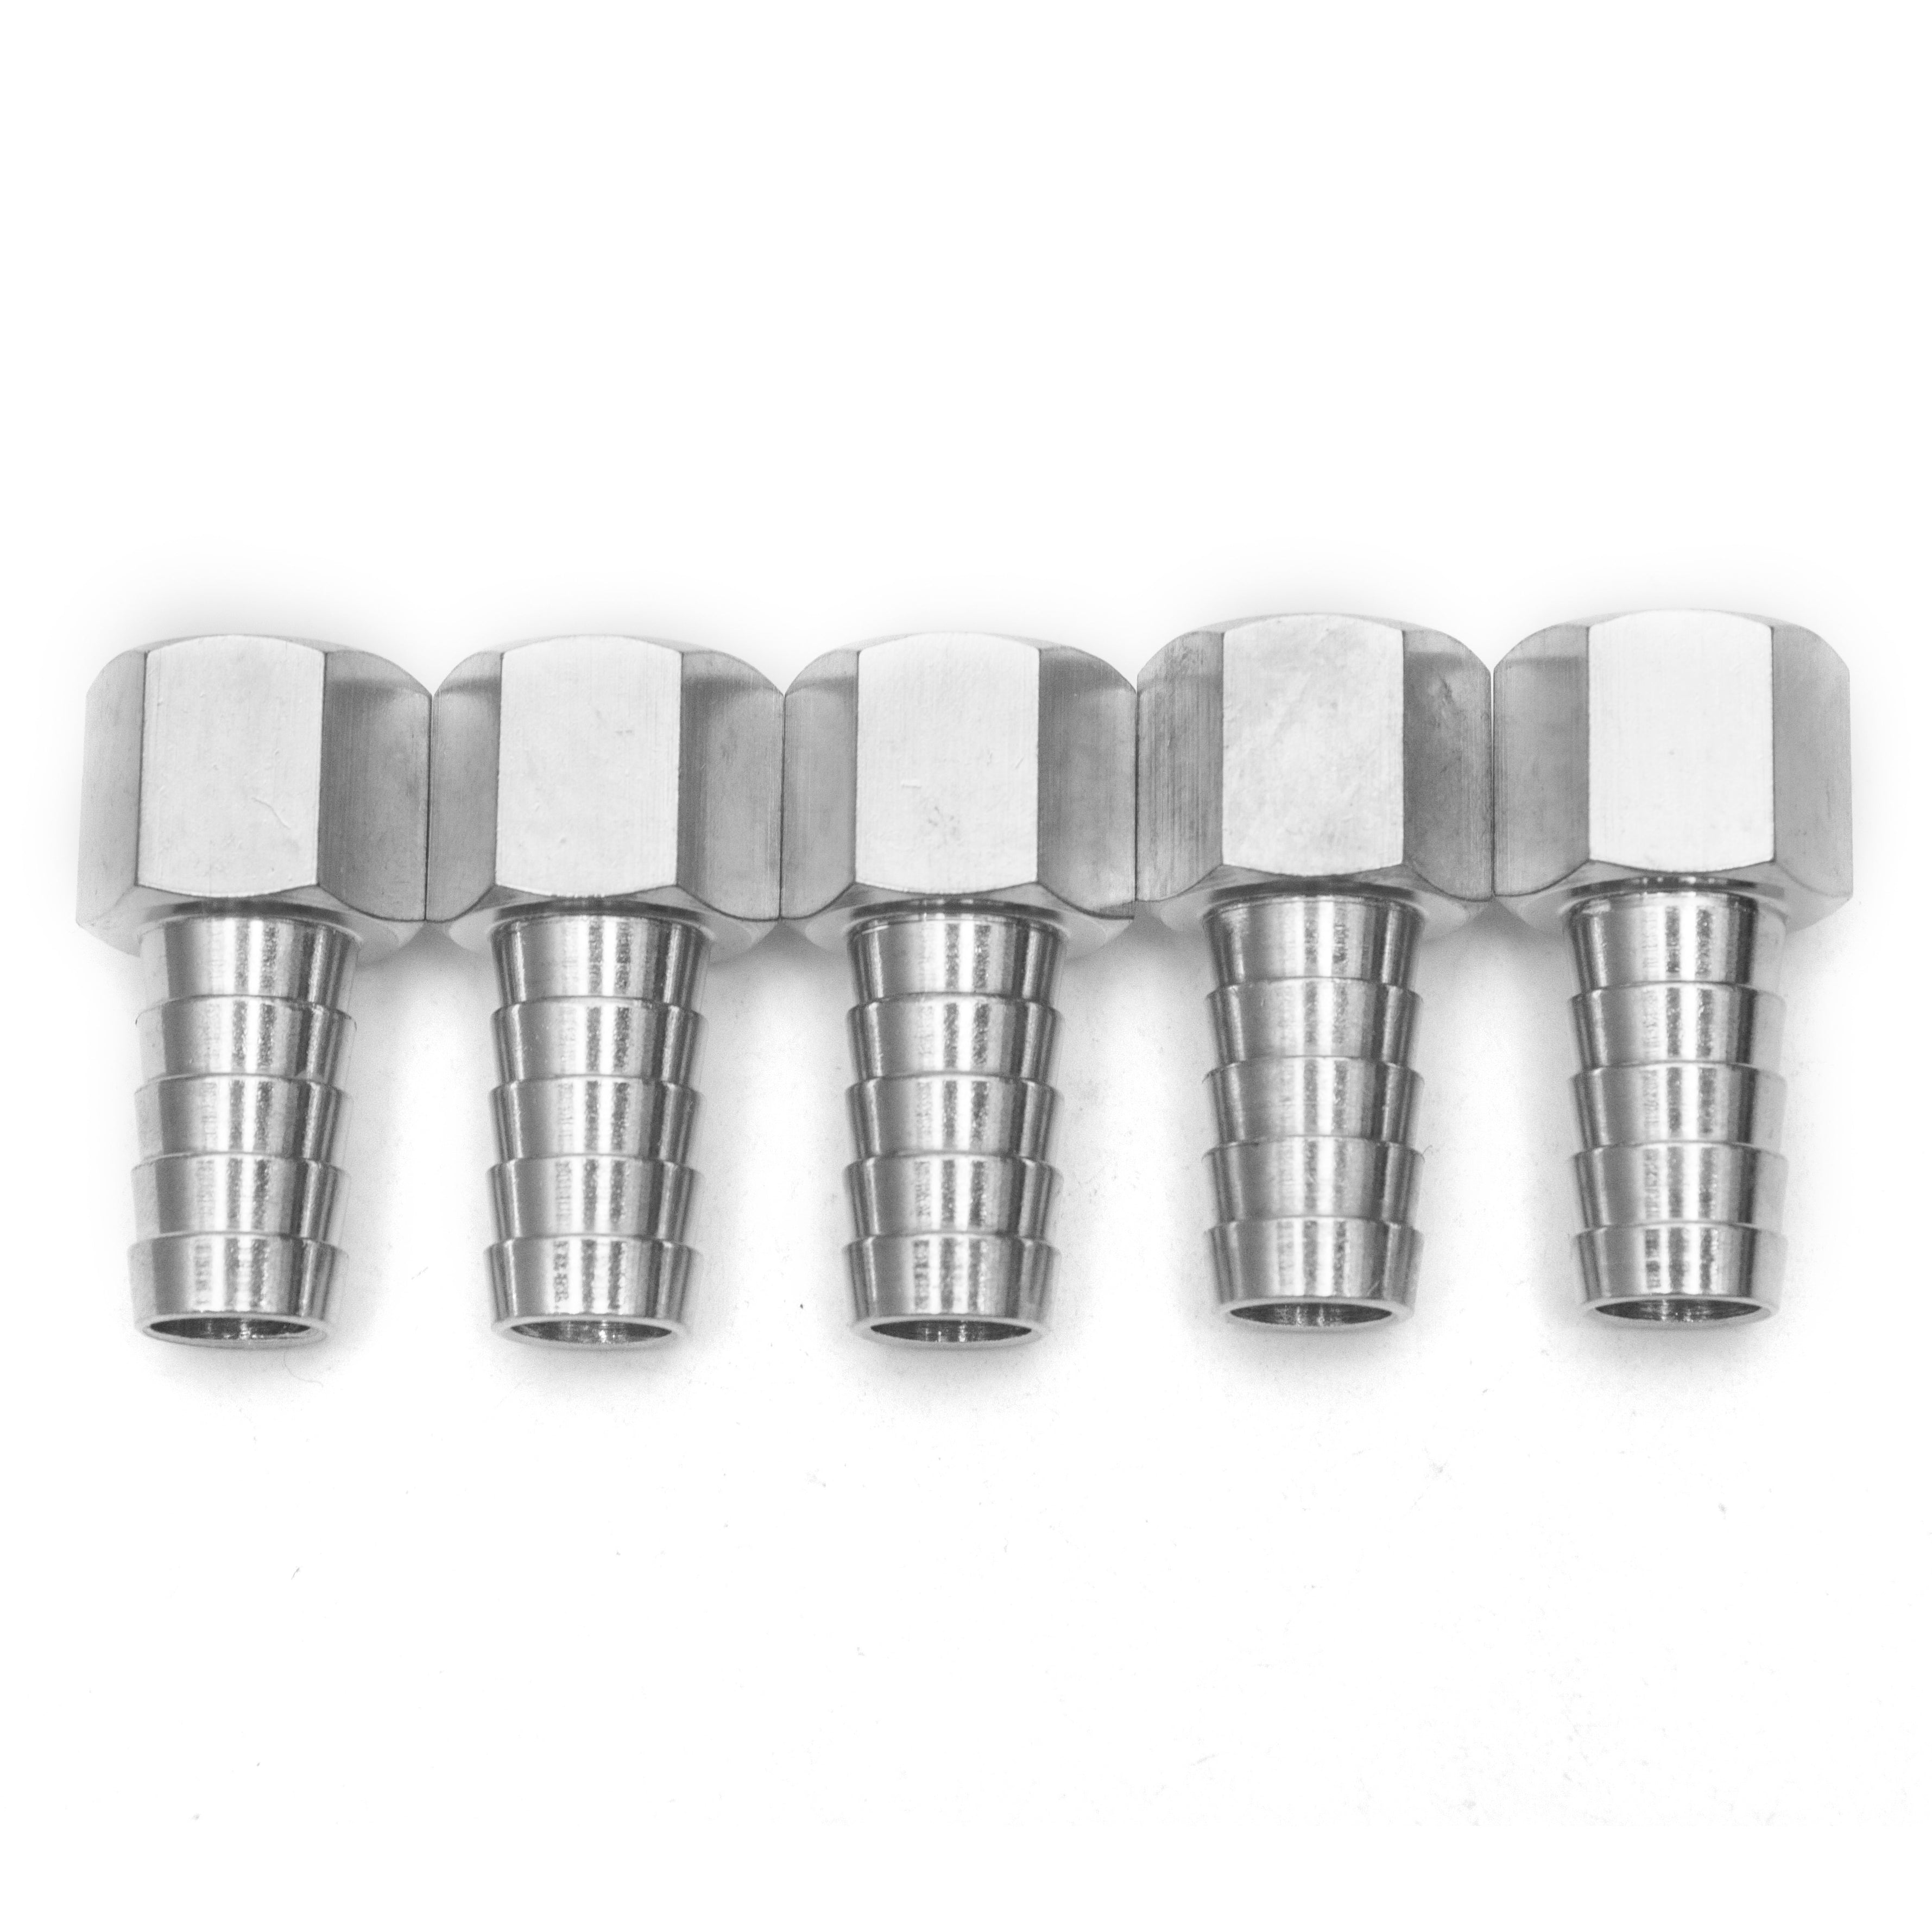 LTWFITTING Bar Production Stainless Steel 316 Barb Fitting Coupler 1/2 Inch Hose ID x 3/8 Inch Female NPT Air Fuel Water (Pack of 5)